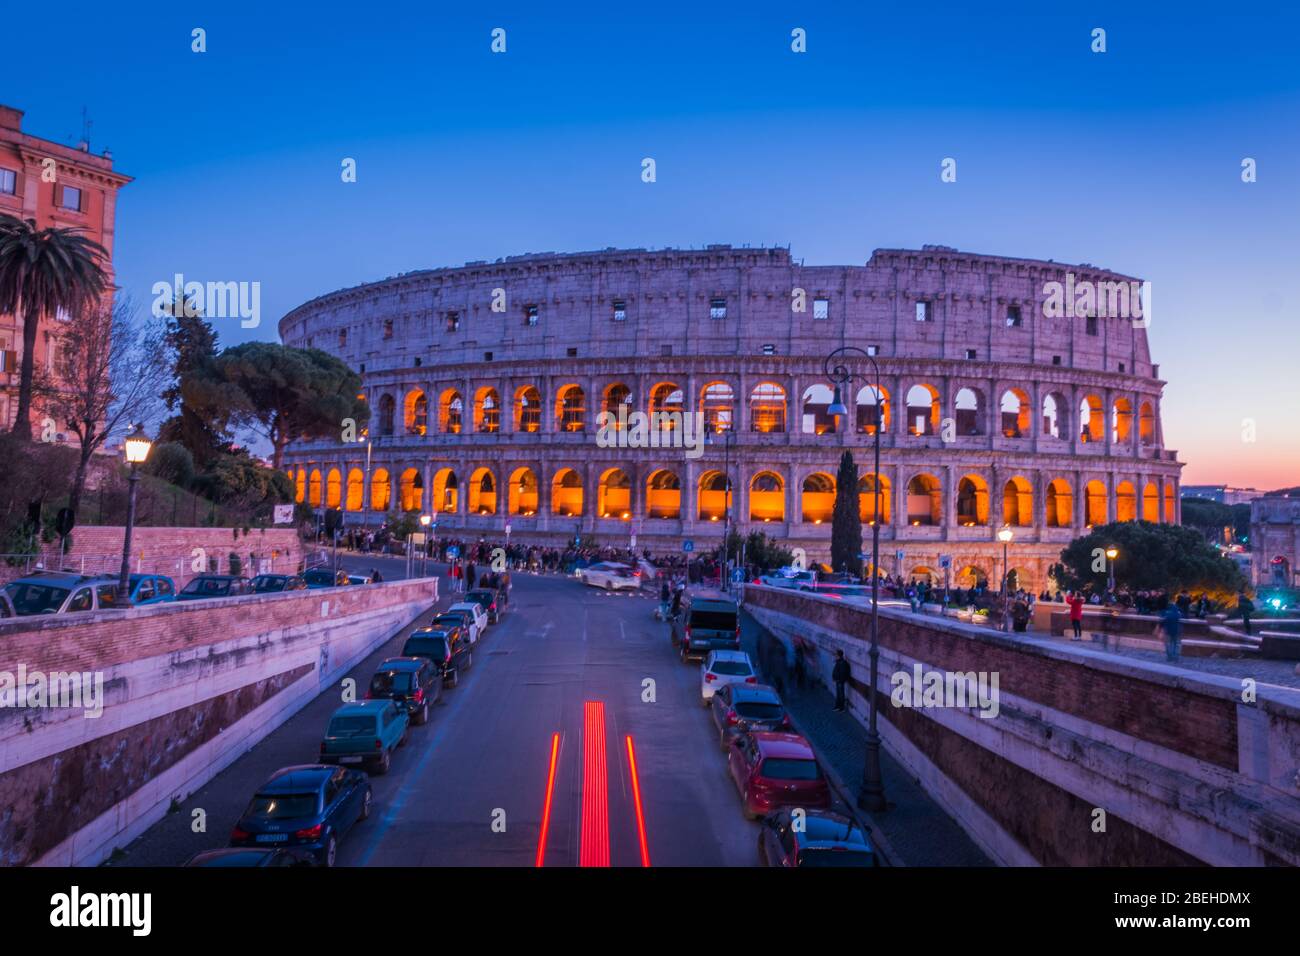 Colosseum in Rome at night before COVID-19 pandemic Stock Photo